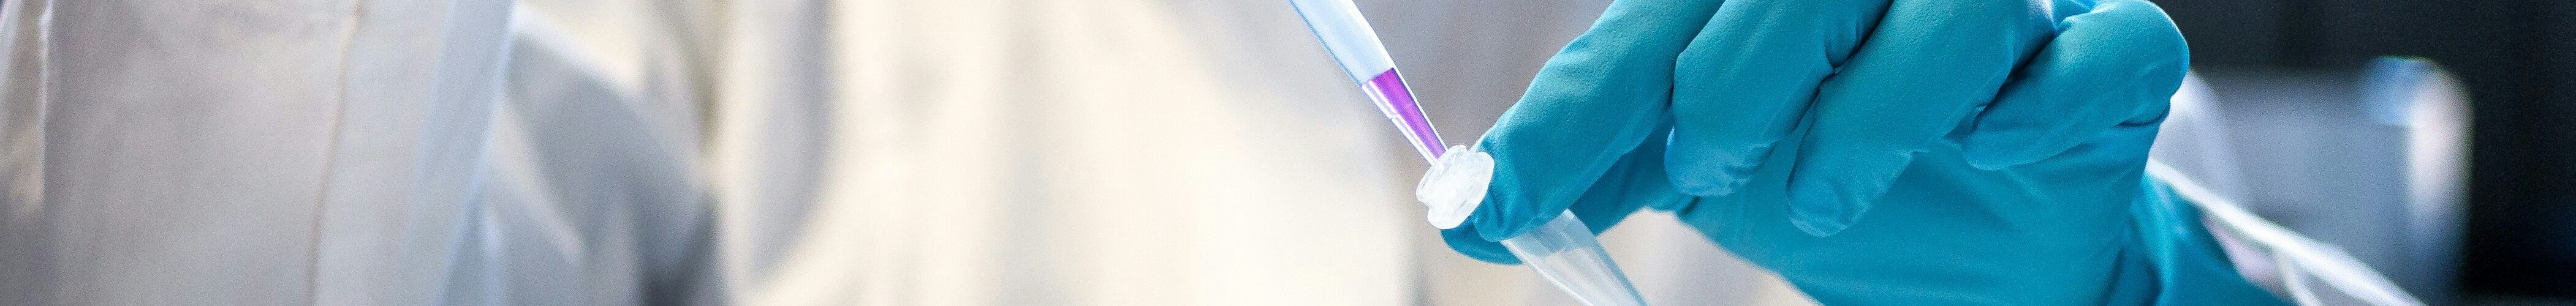 A photo of a woman with nitrtile gloves on pipetting a purple solution into an eppendorf